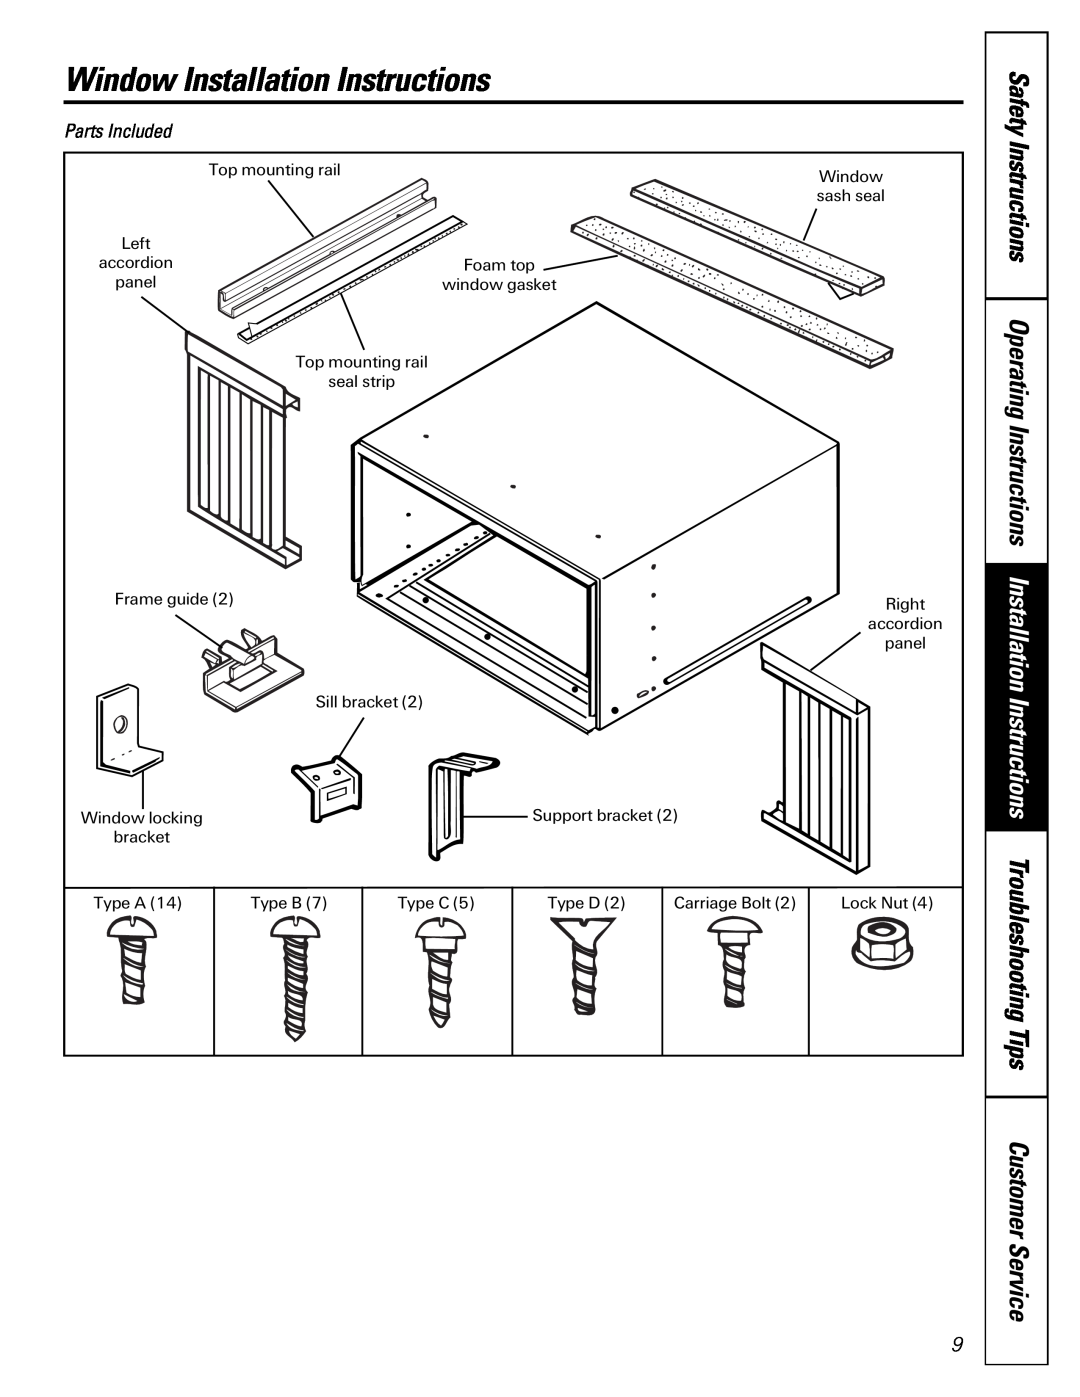 GE 3828A, 30036P owner manual Window Installation Instructions, Customer Service, Parts Included 